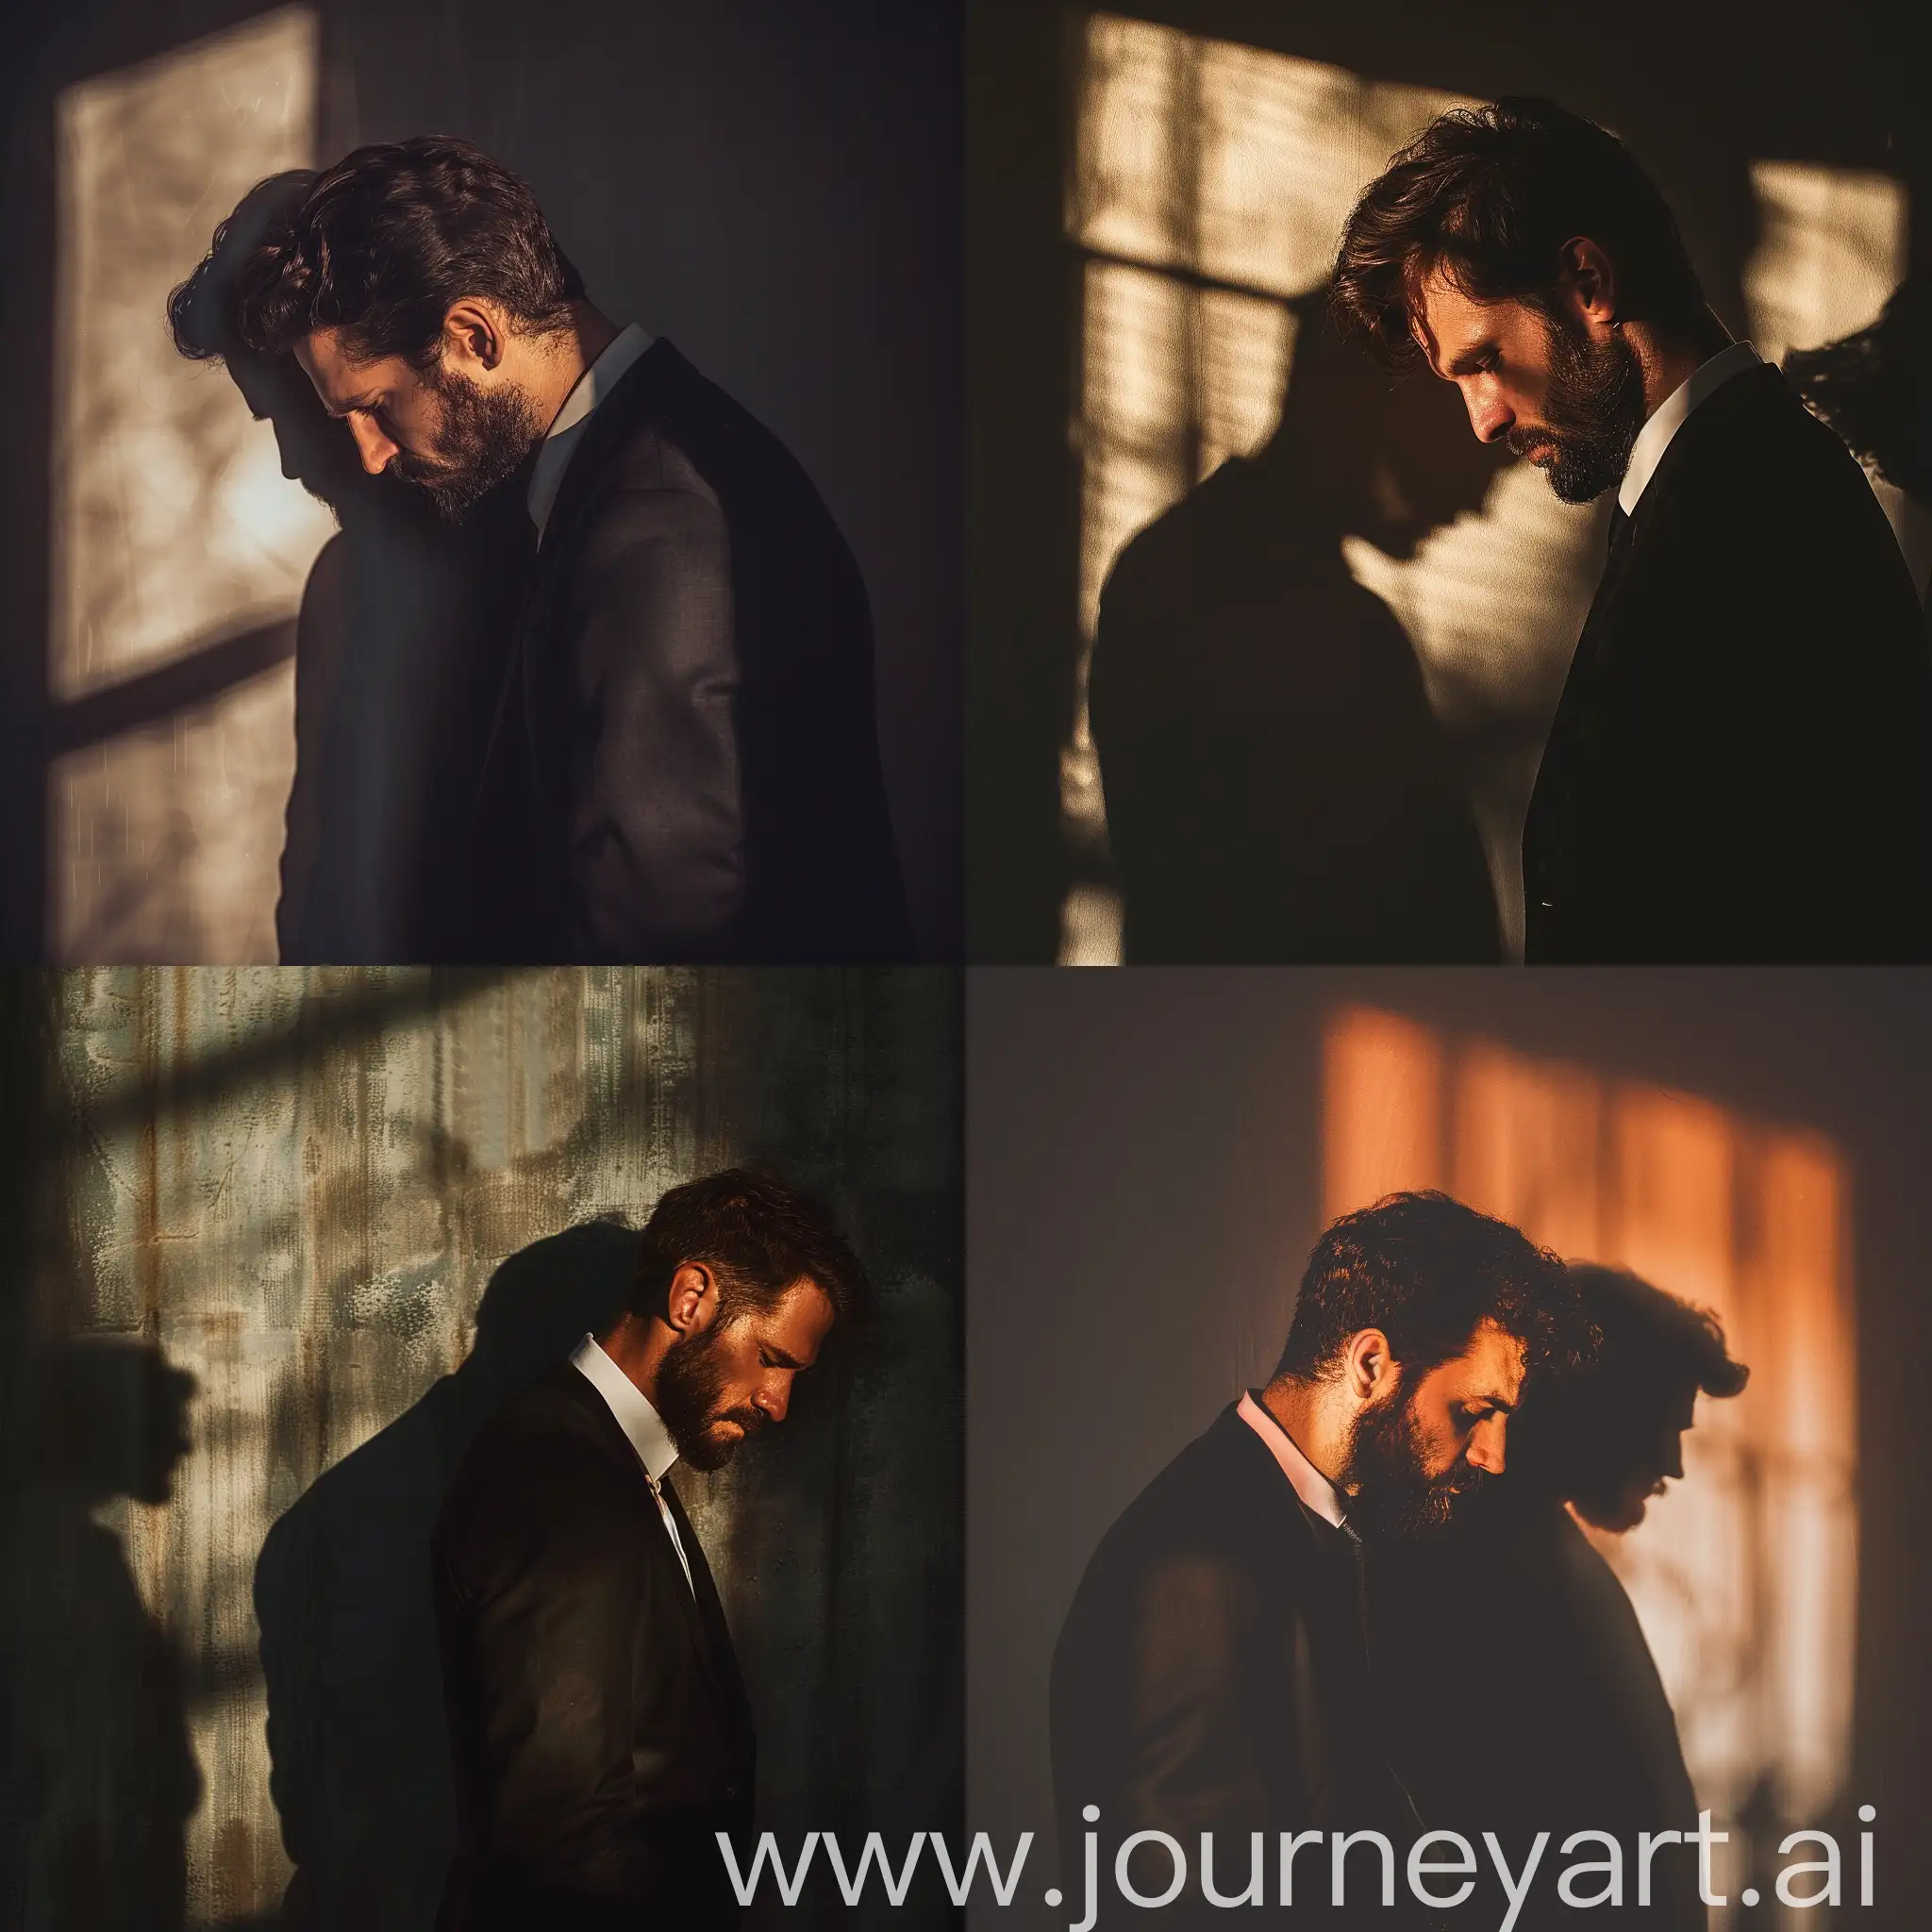 A Man with a Beard with his Head Down Standing Next to the Wall in Dark Place, The Light Shines on the Man And the Shadow of the Man on the Wall, Formal Outfit, Cinematic Photography Style, Natural Shadow, Natural Color Details, Extremely Details, High Quality --v 6.0